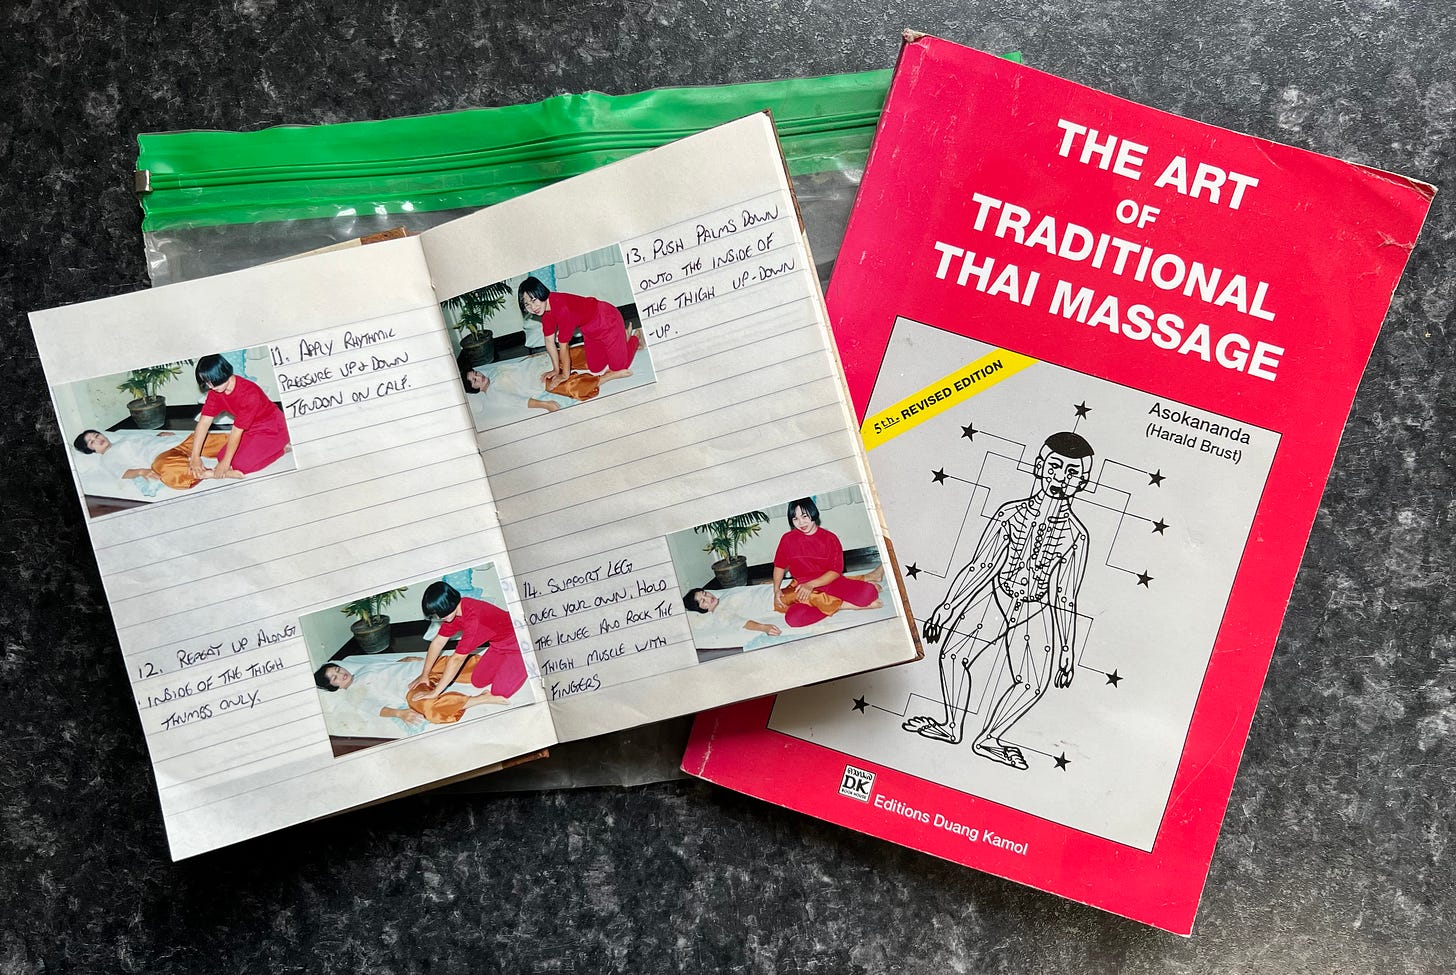 A notebook lies open showing instructions on how to massage